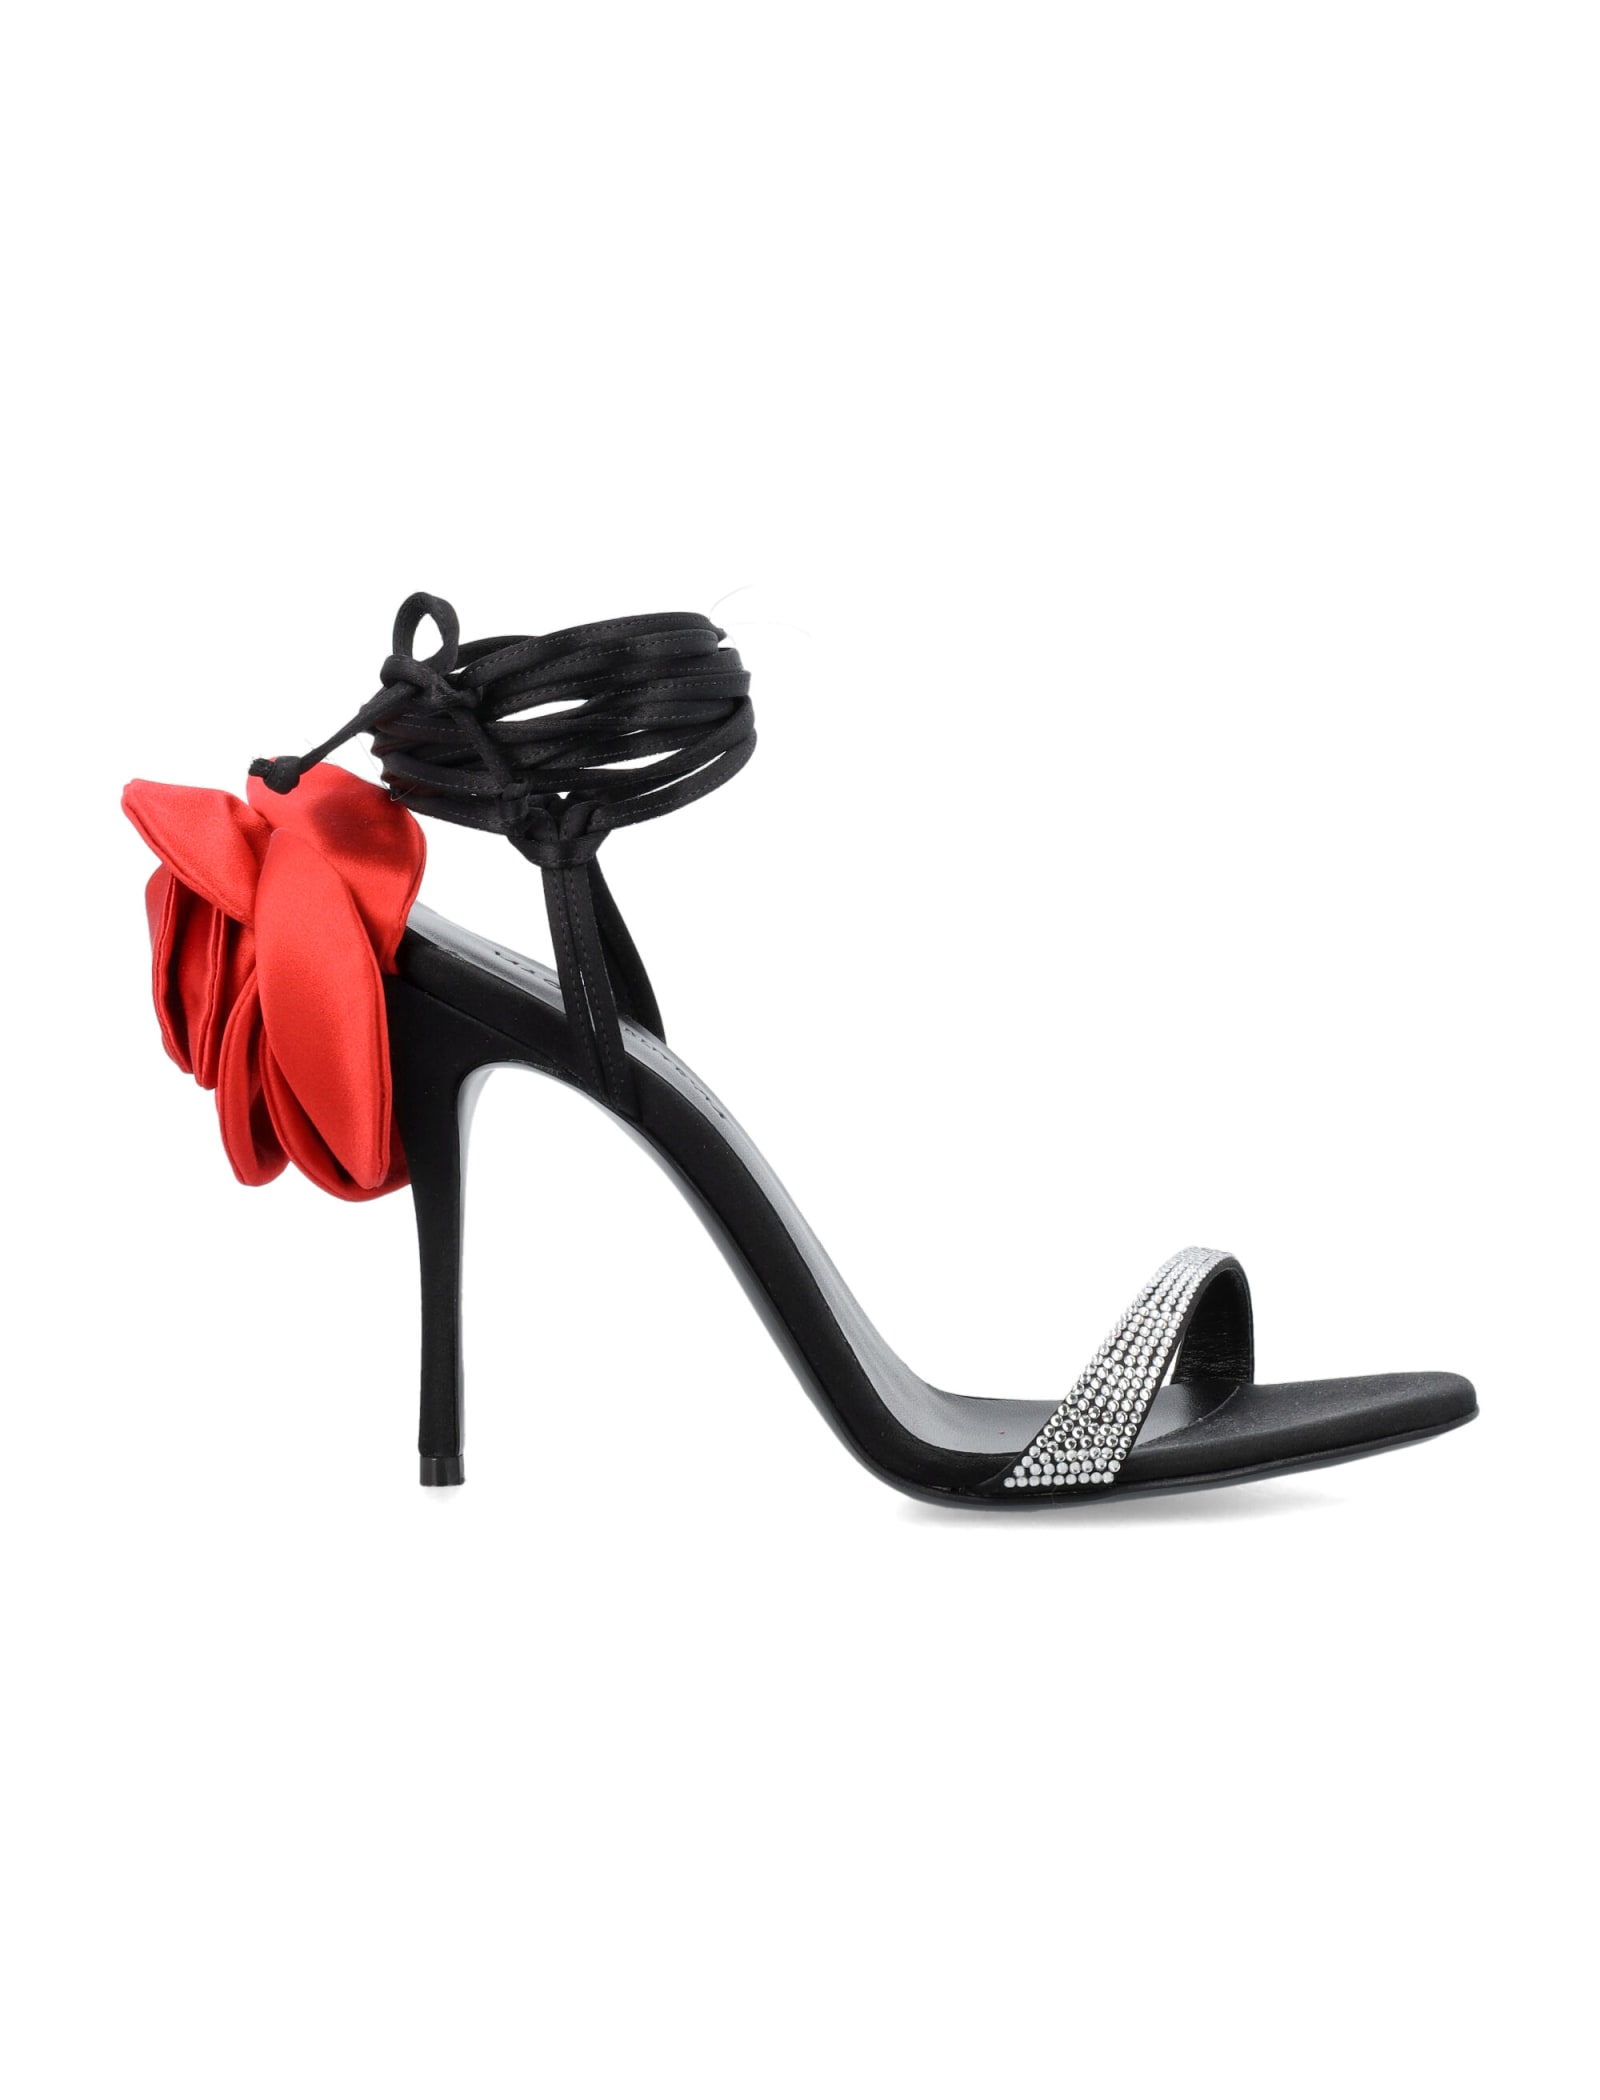 MAGDA BUTRYM RED FLOWERS HEEL SANDALS WITH STRASS